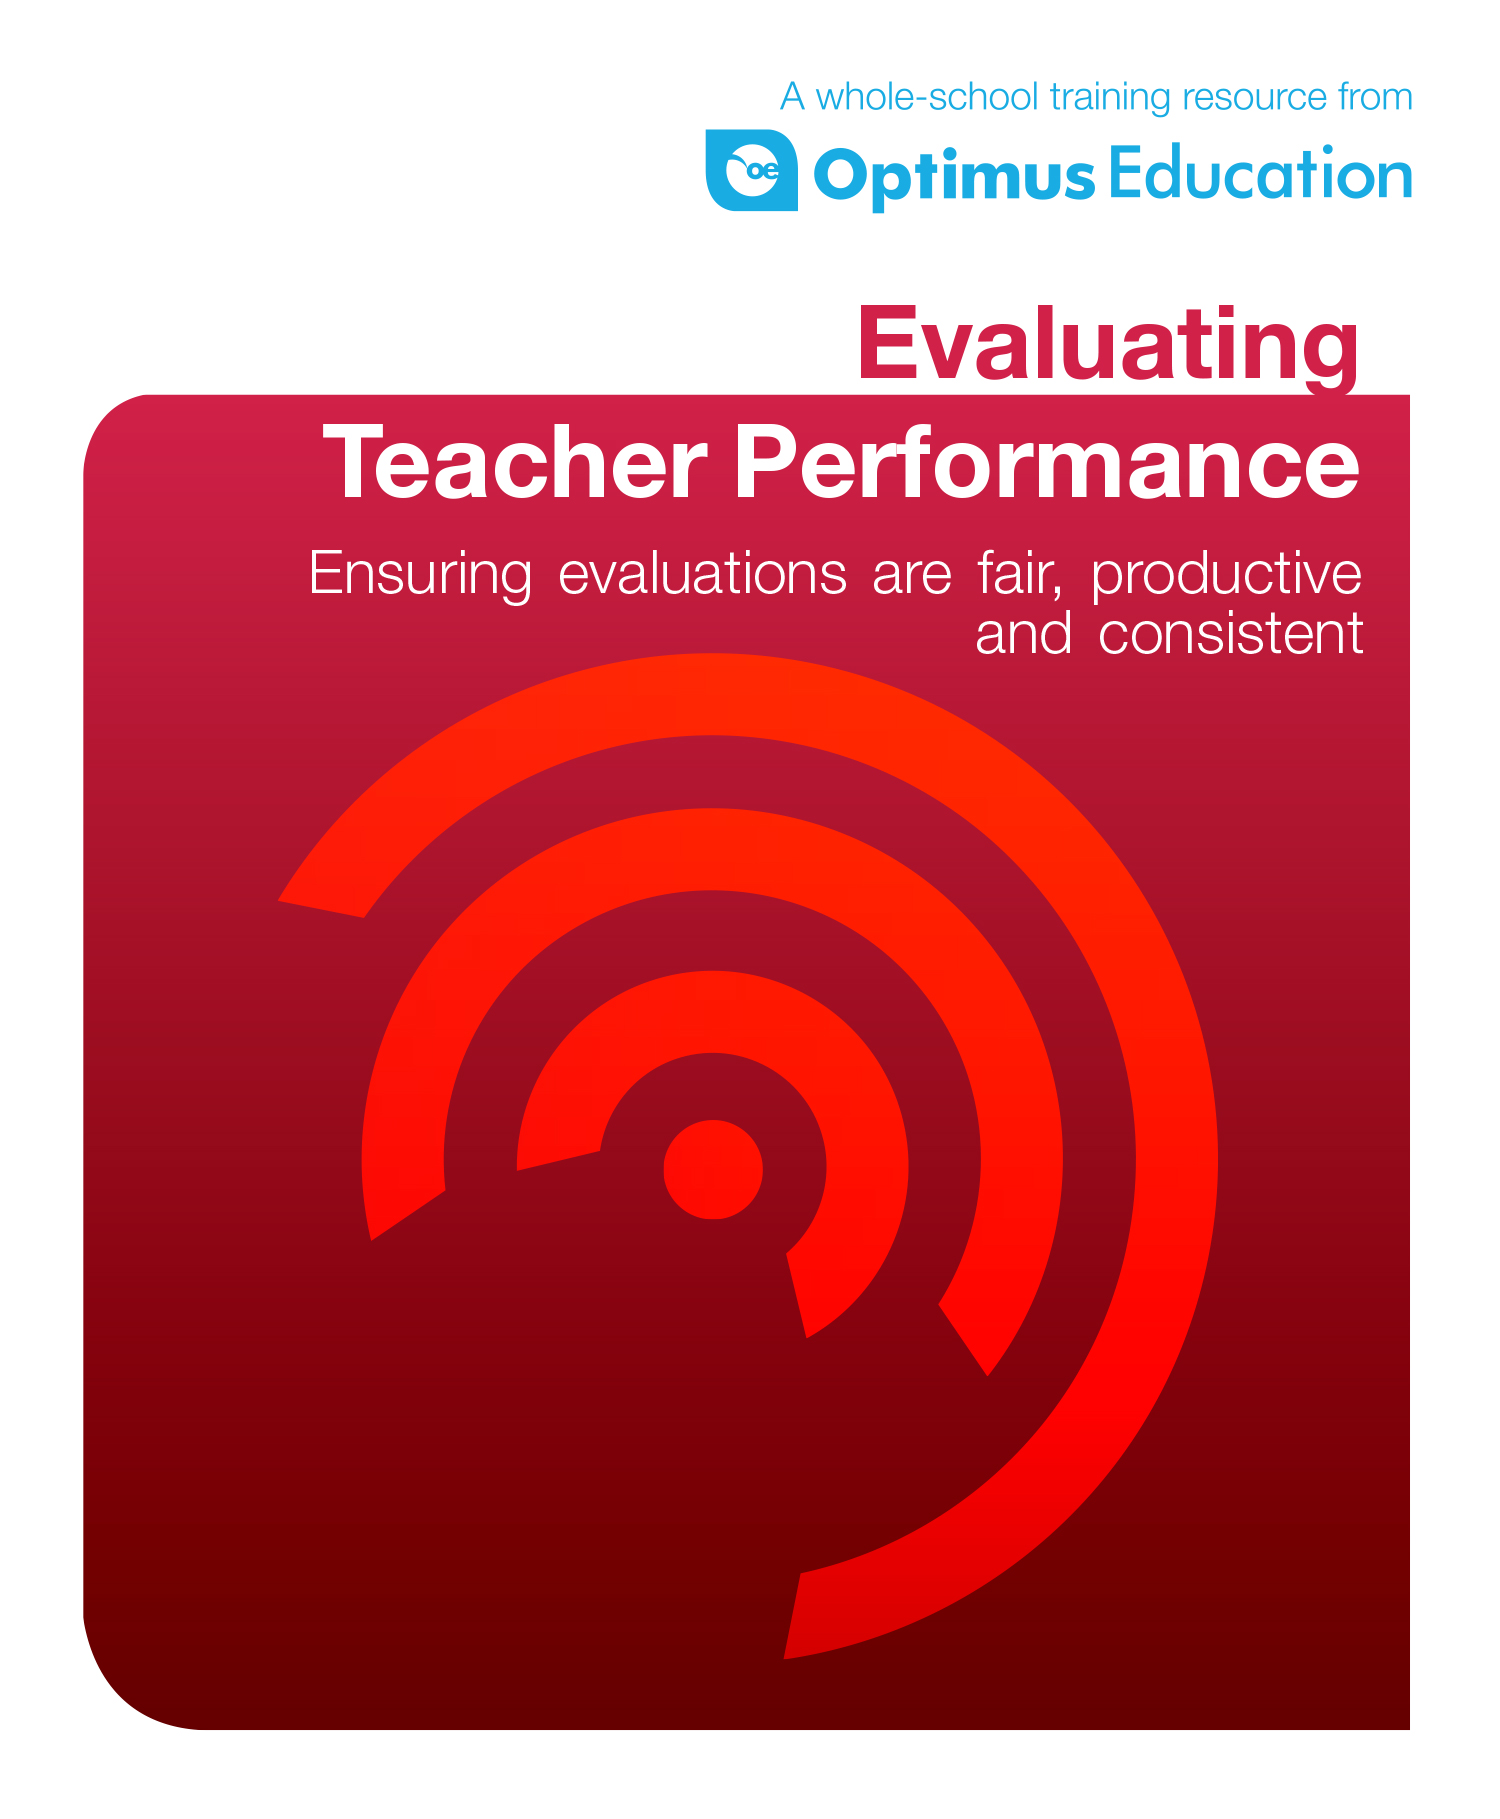 Evaluating Teacher Performance: Ensuring evaluations are fair, productive and consistent